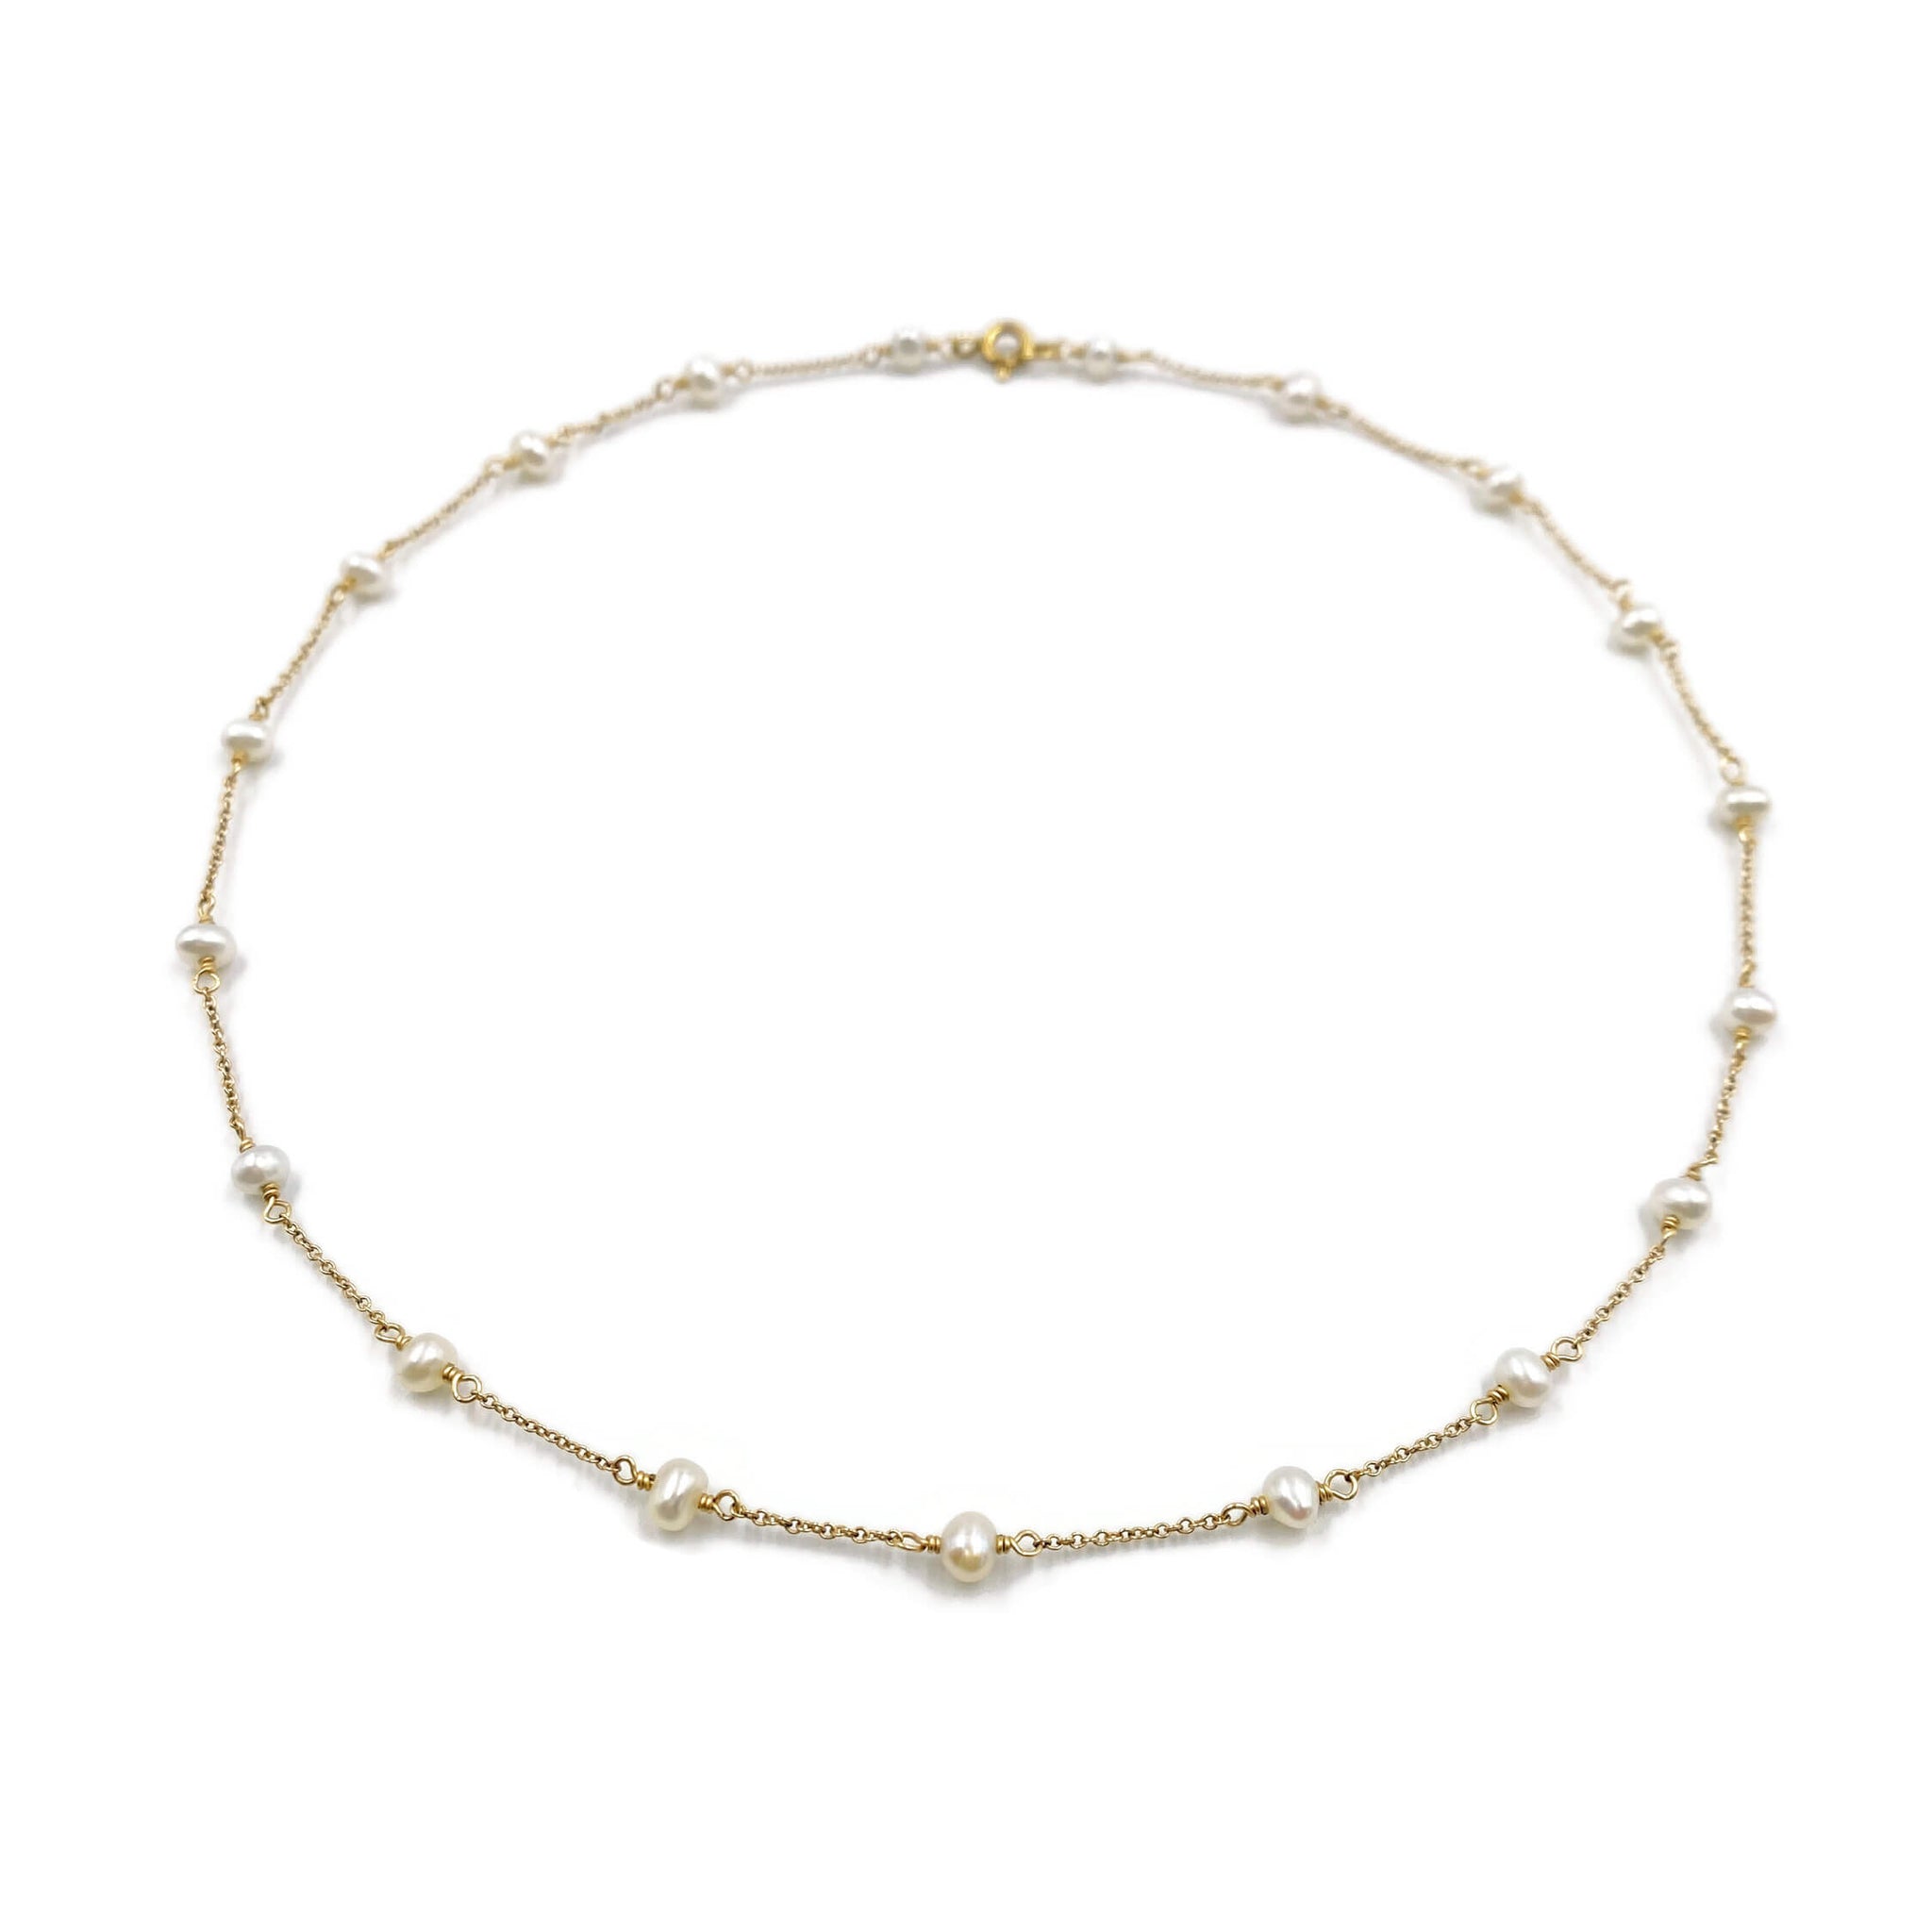 This is a pearl chain necklace that can be made in 14k solid gold or gold filled chain. 